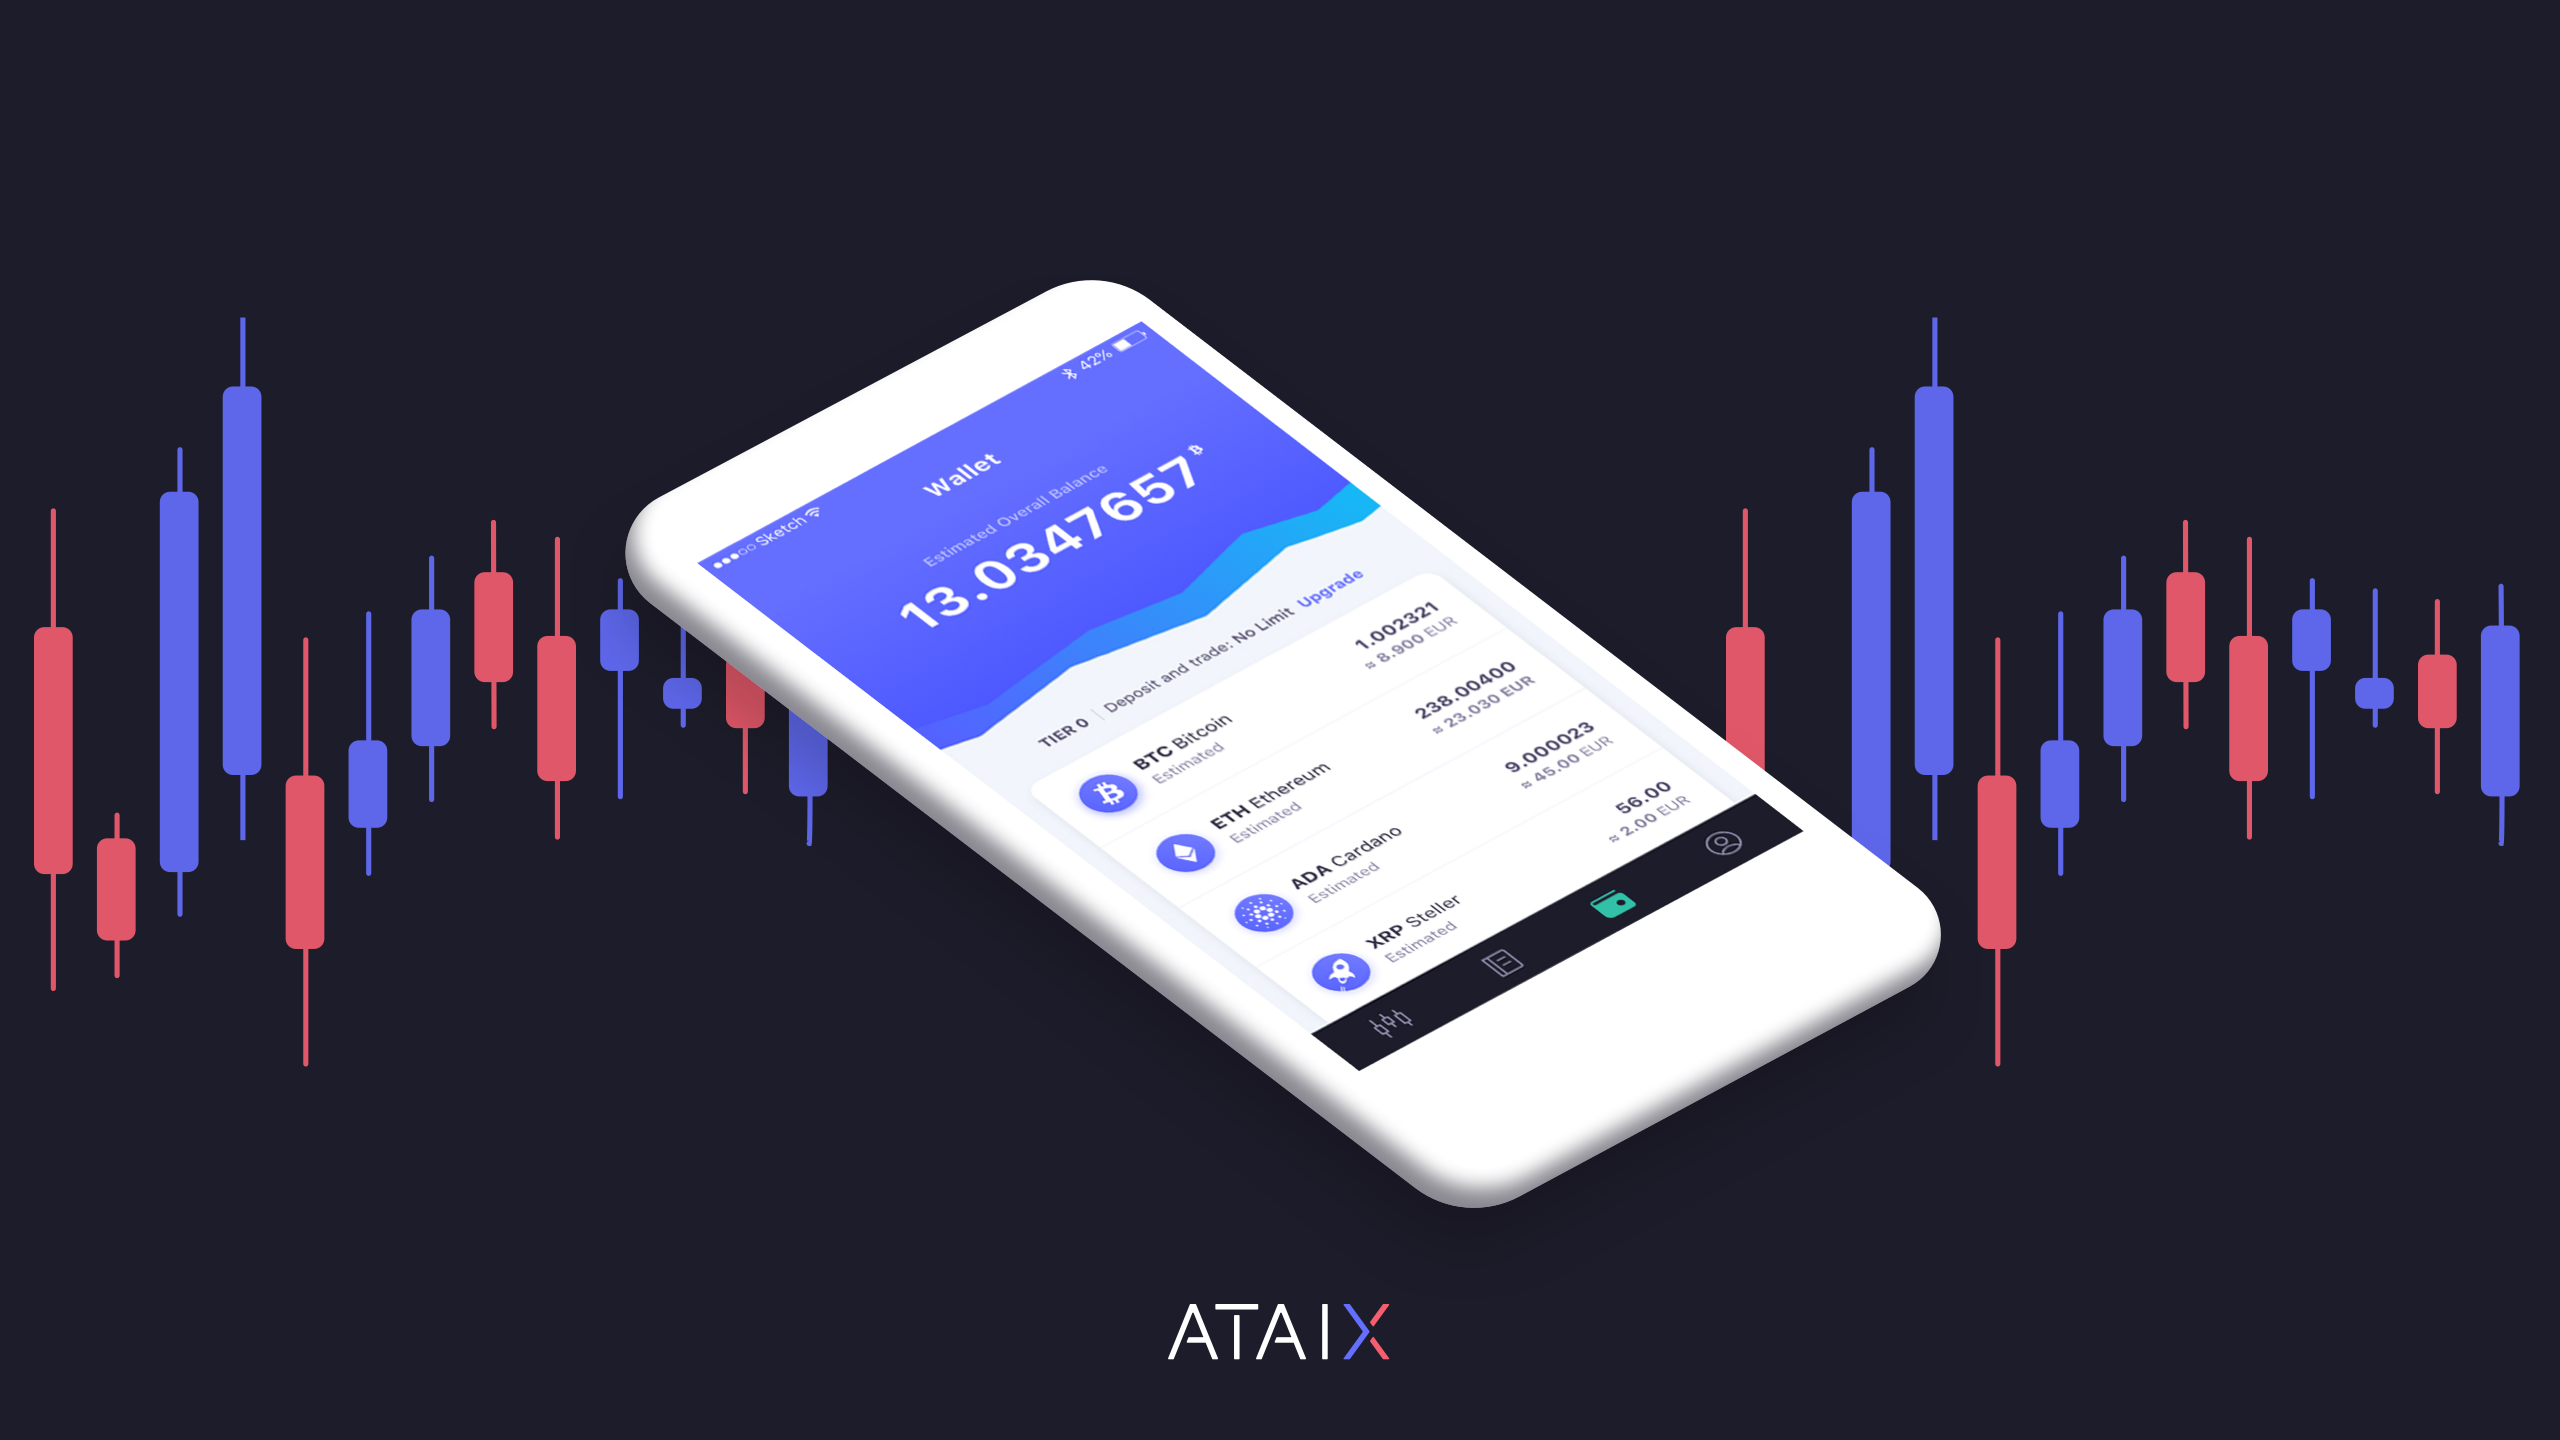 ATAIX App Now Available for Android and iOS